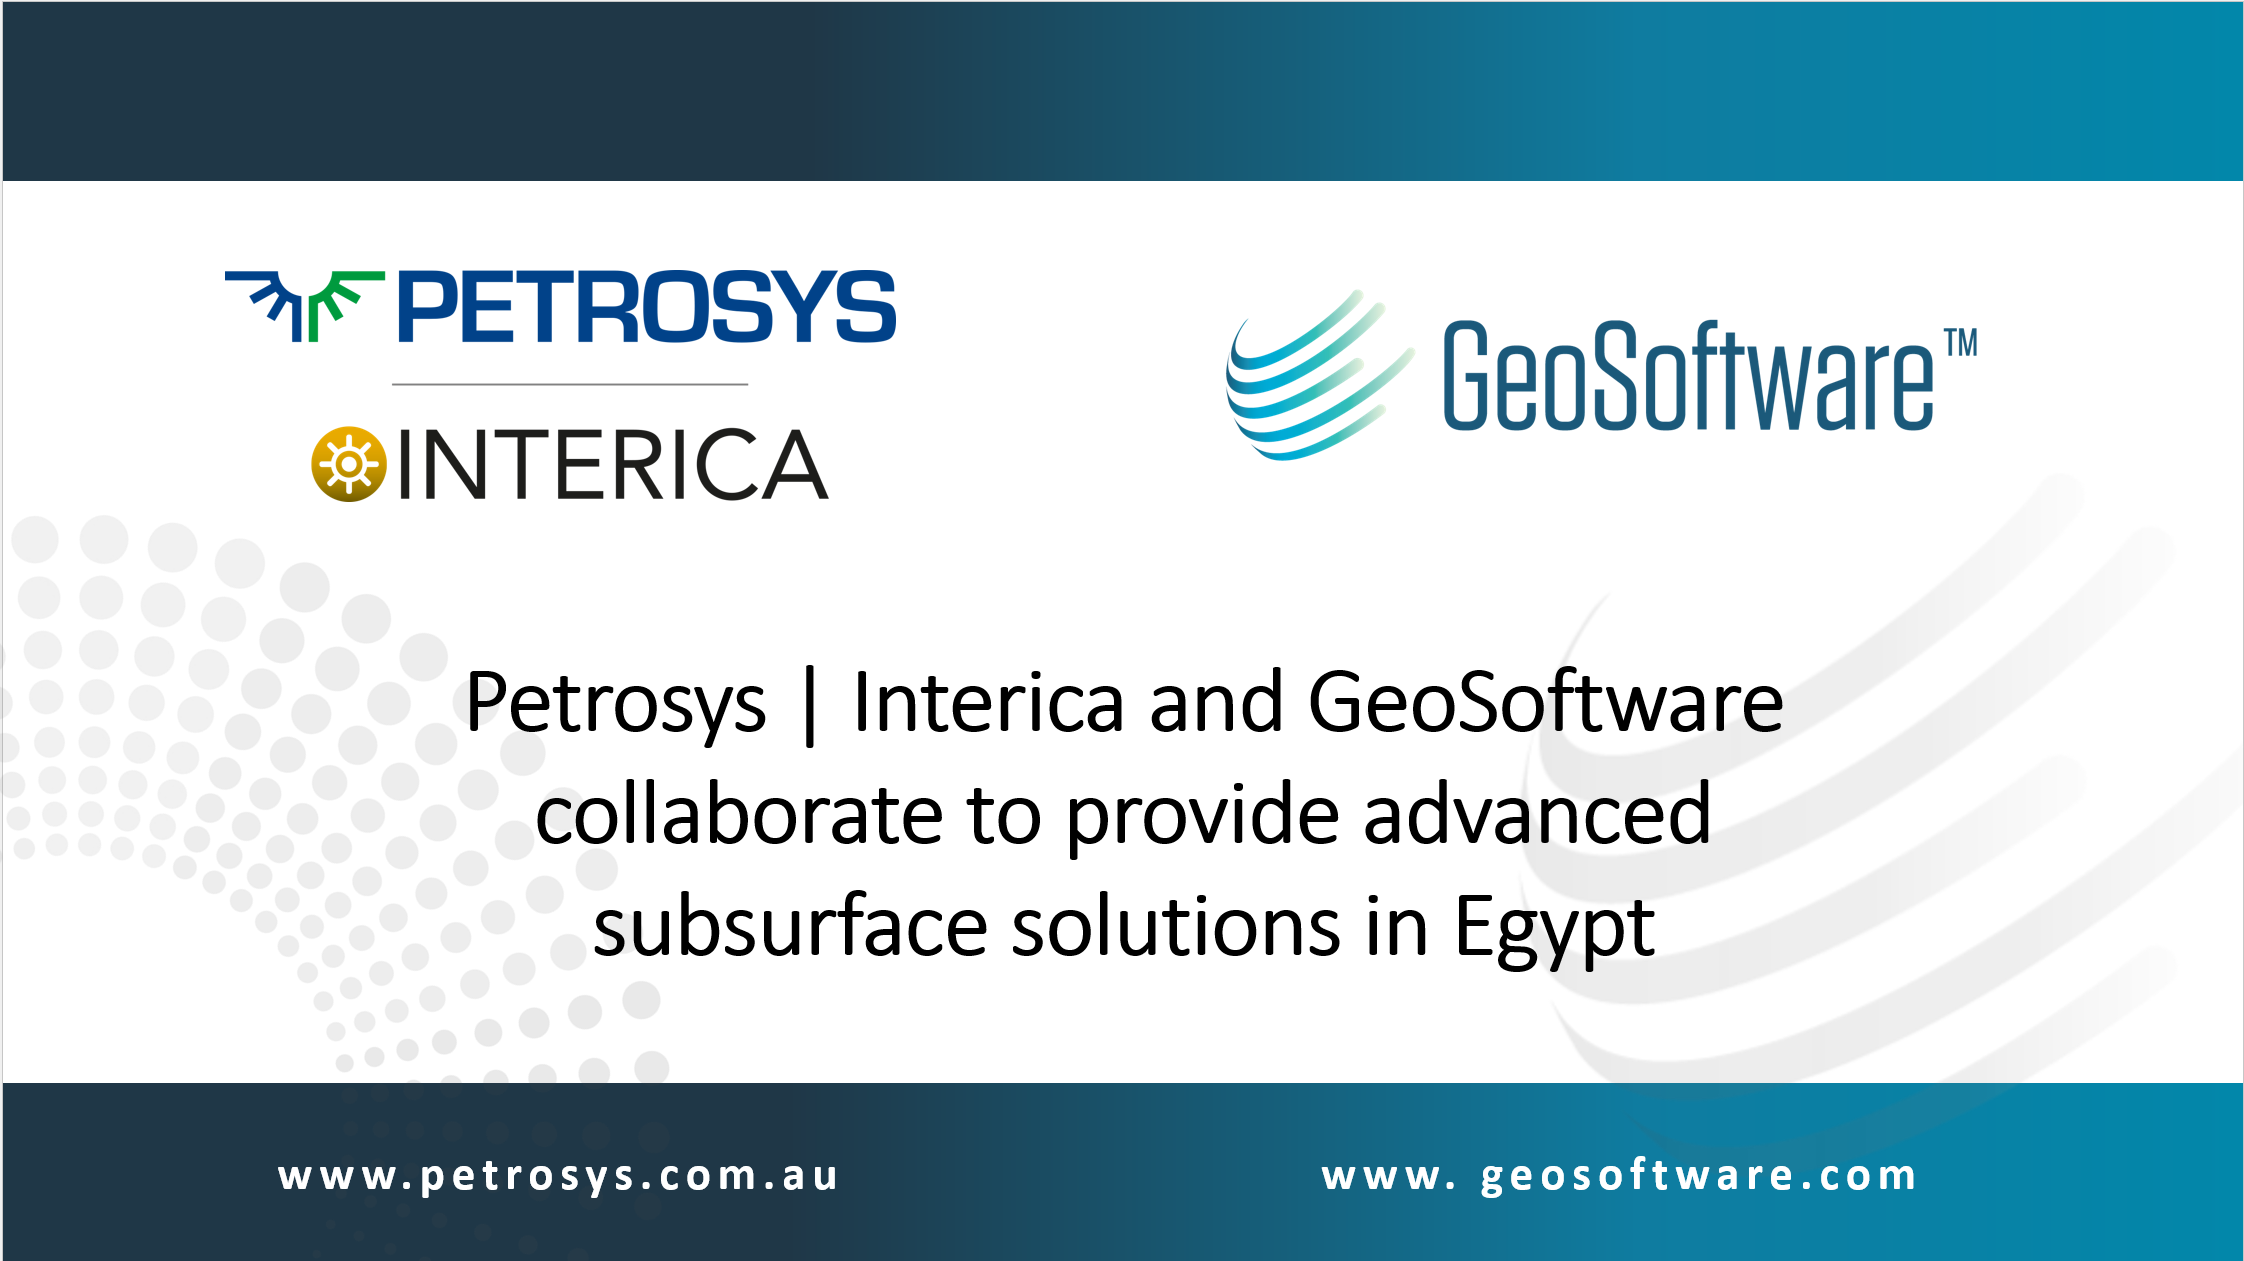 Petrosys and GeoSoftware collaboration